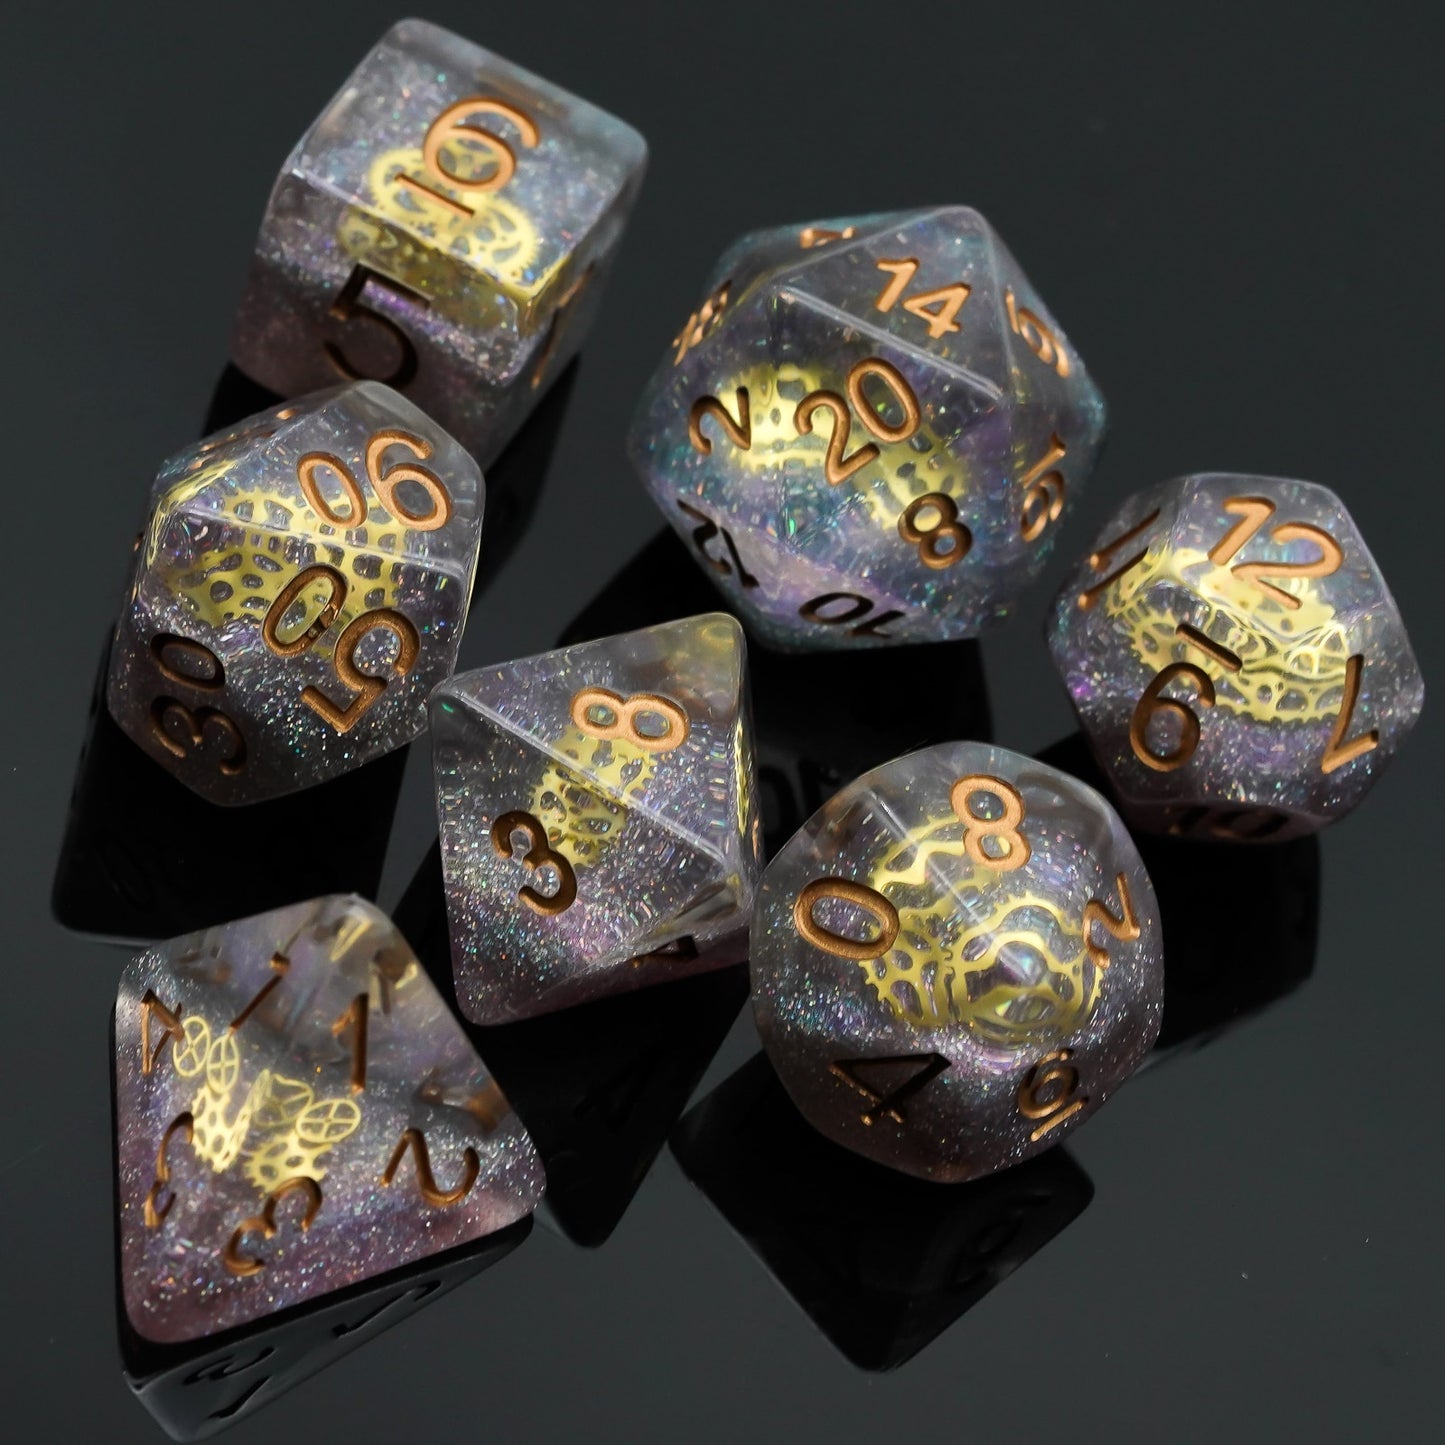 Gold numbers and gears, 7 piece dice set with star-like resin 